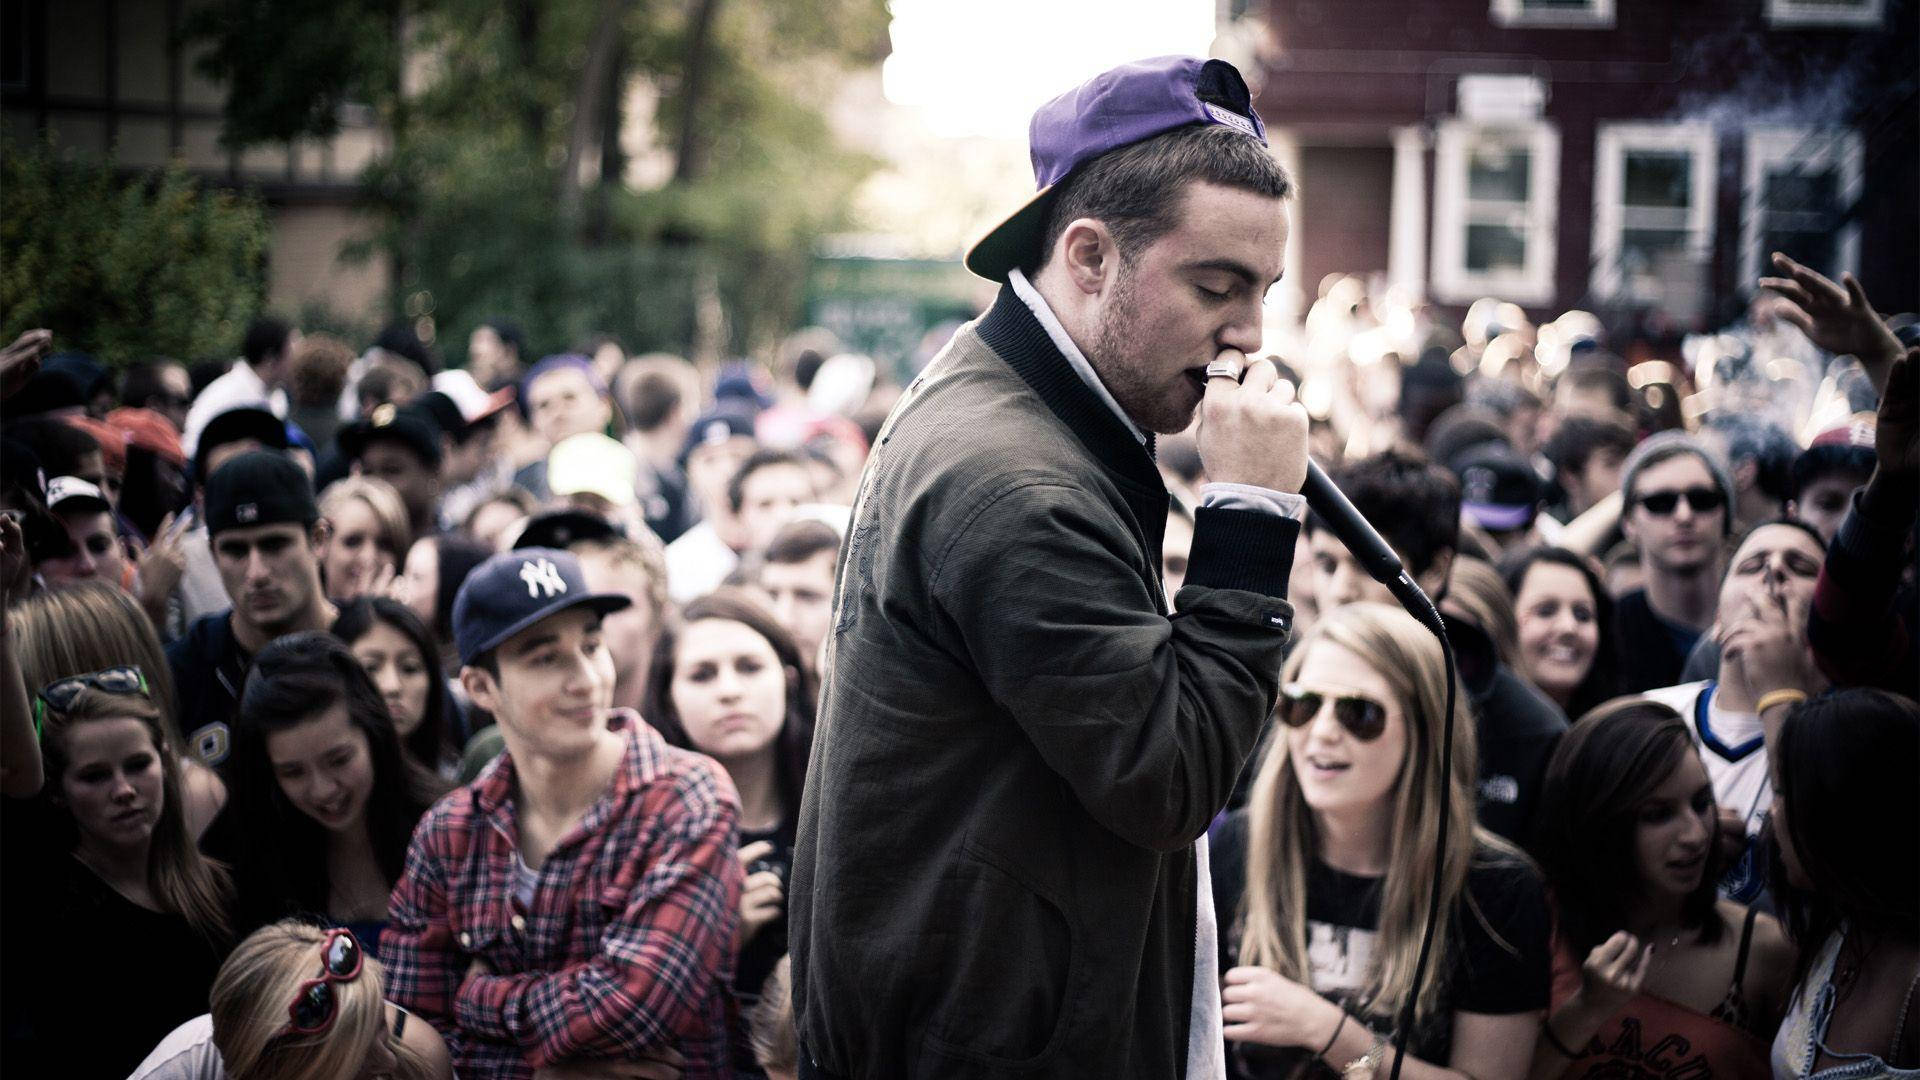 Mac Miller Performing Outdoors With Crowd Wallpaper